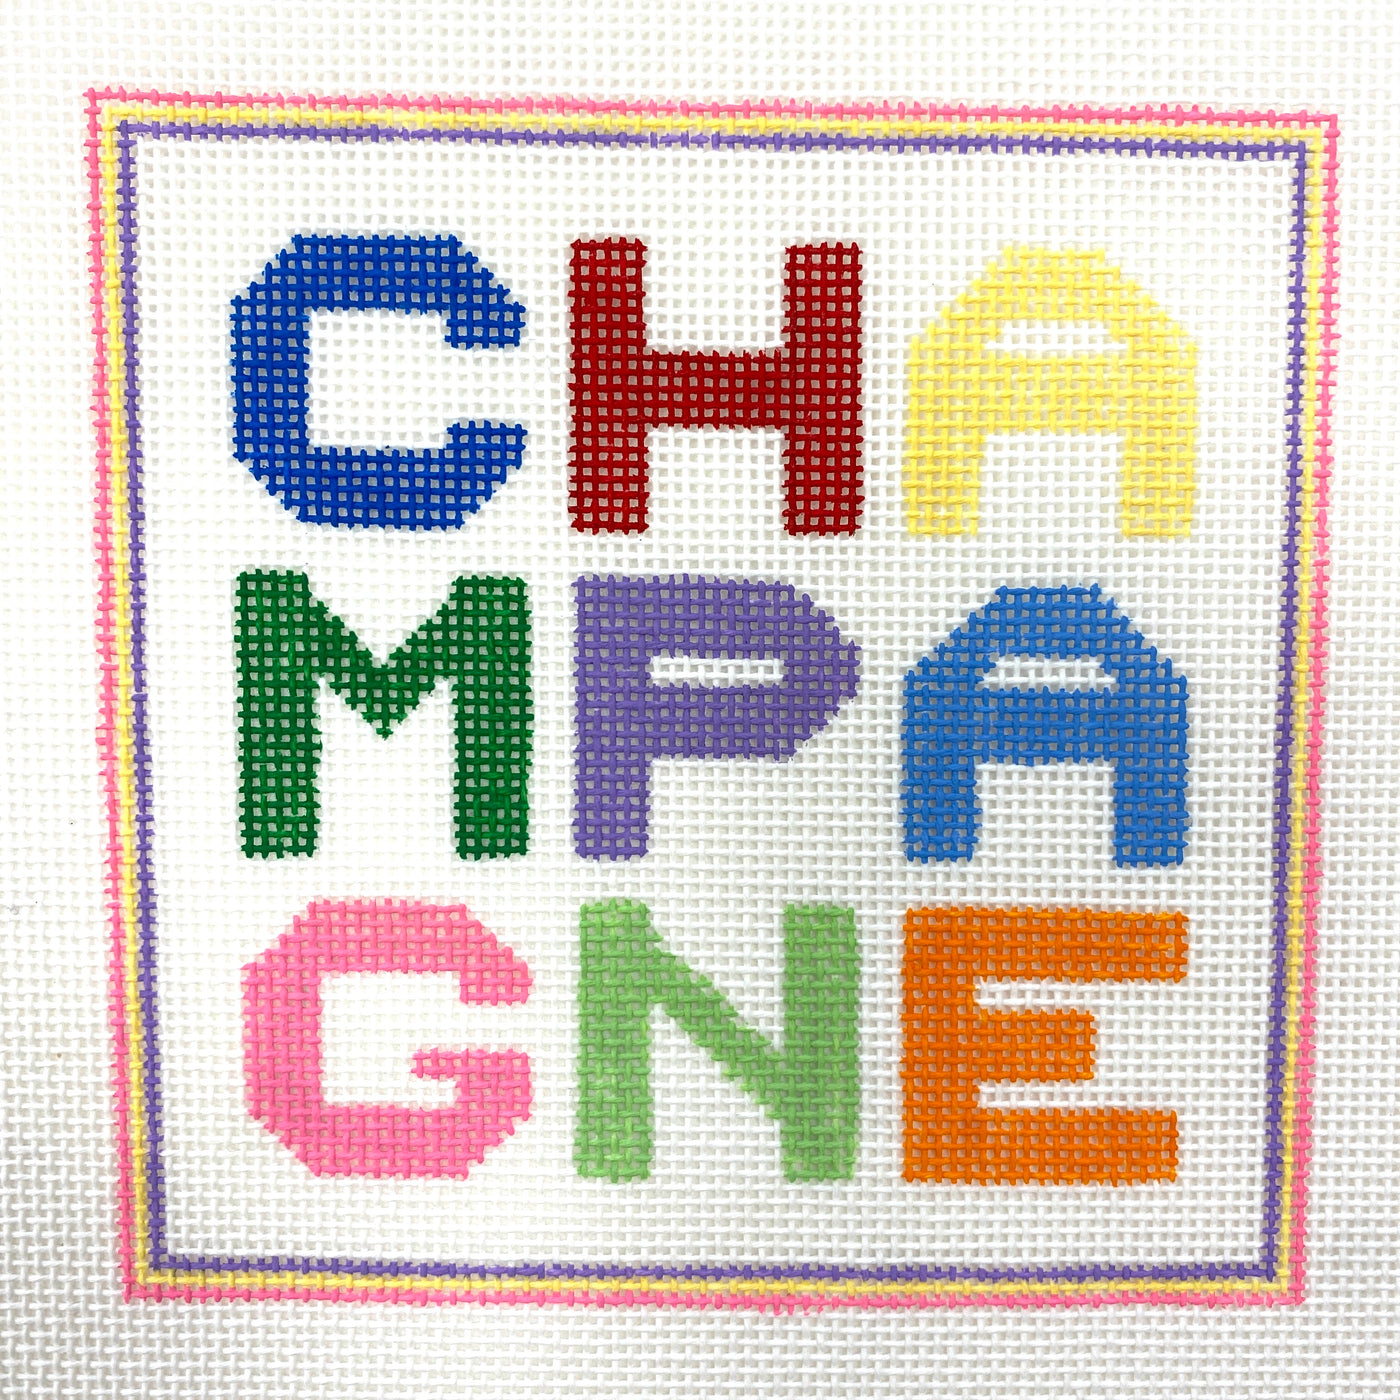 CHAMPAGNE Silver Stitch Handpainted Needlepoint Canvas Size: 4.5" x 4.5" / 18 Mesh